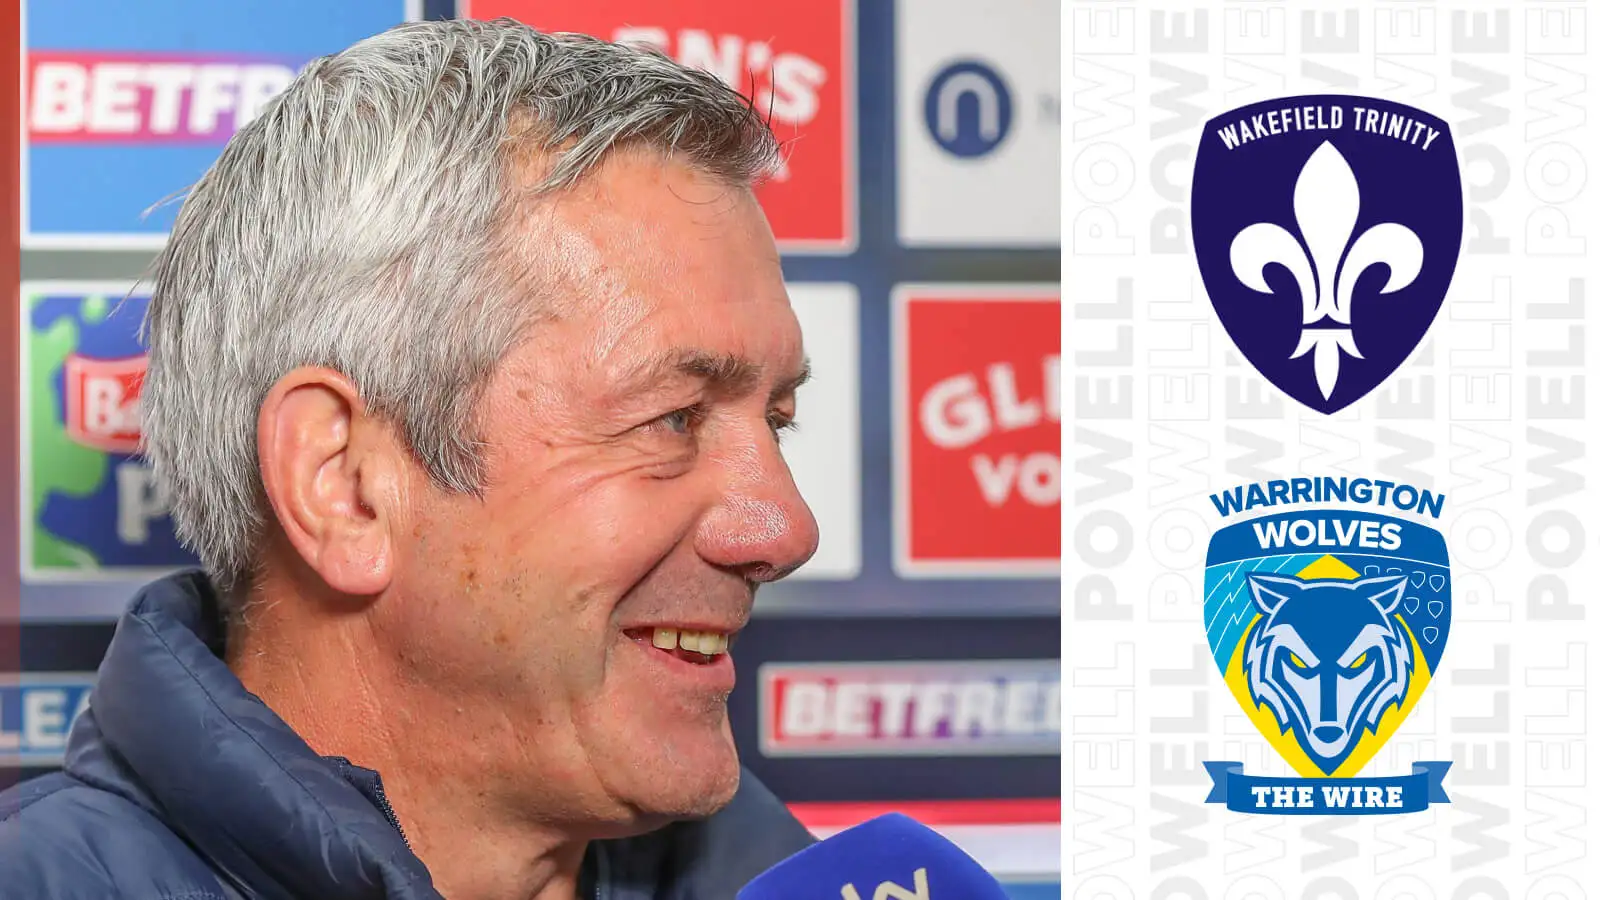 Wakefield Trinity boss Daryl Powell reveals why he couldn’t walk away from rugby league after Warrington Wolves sacking